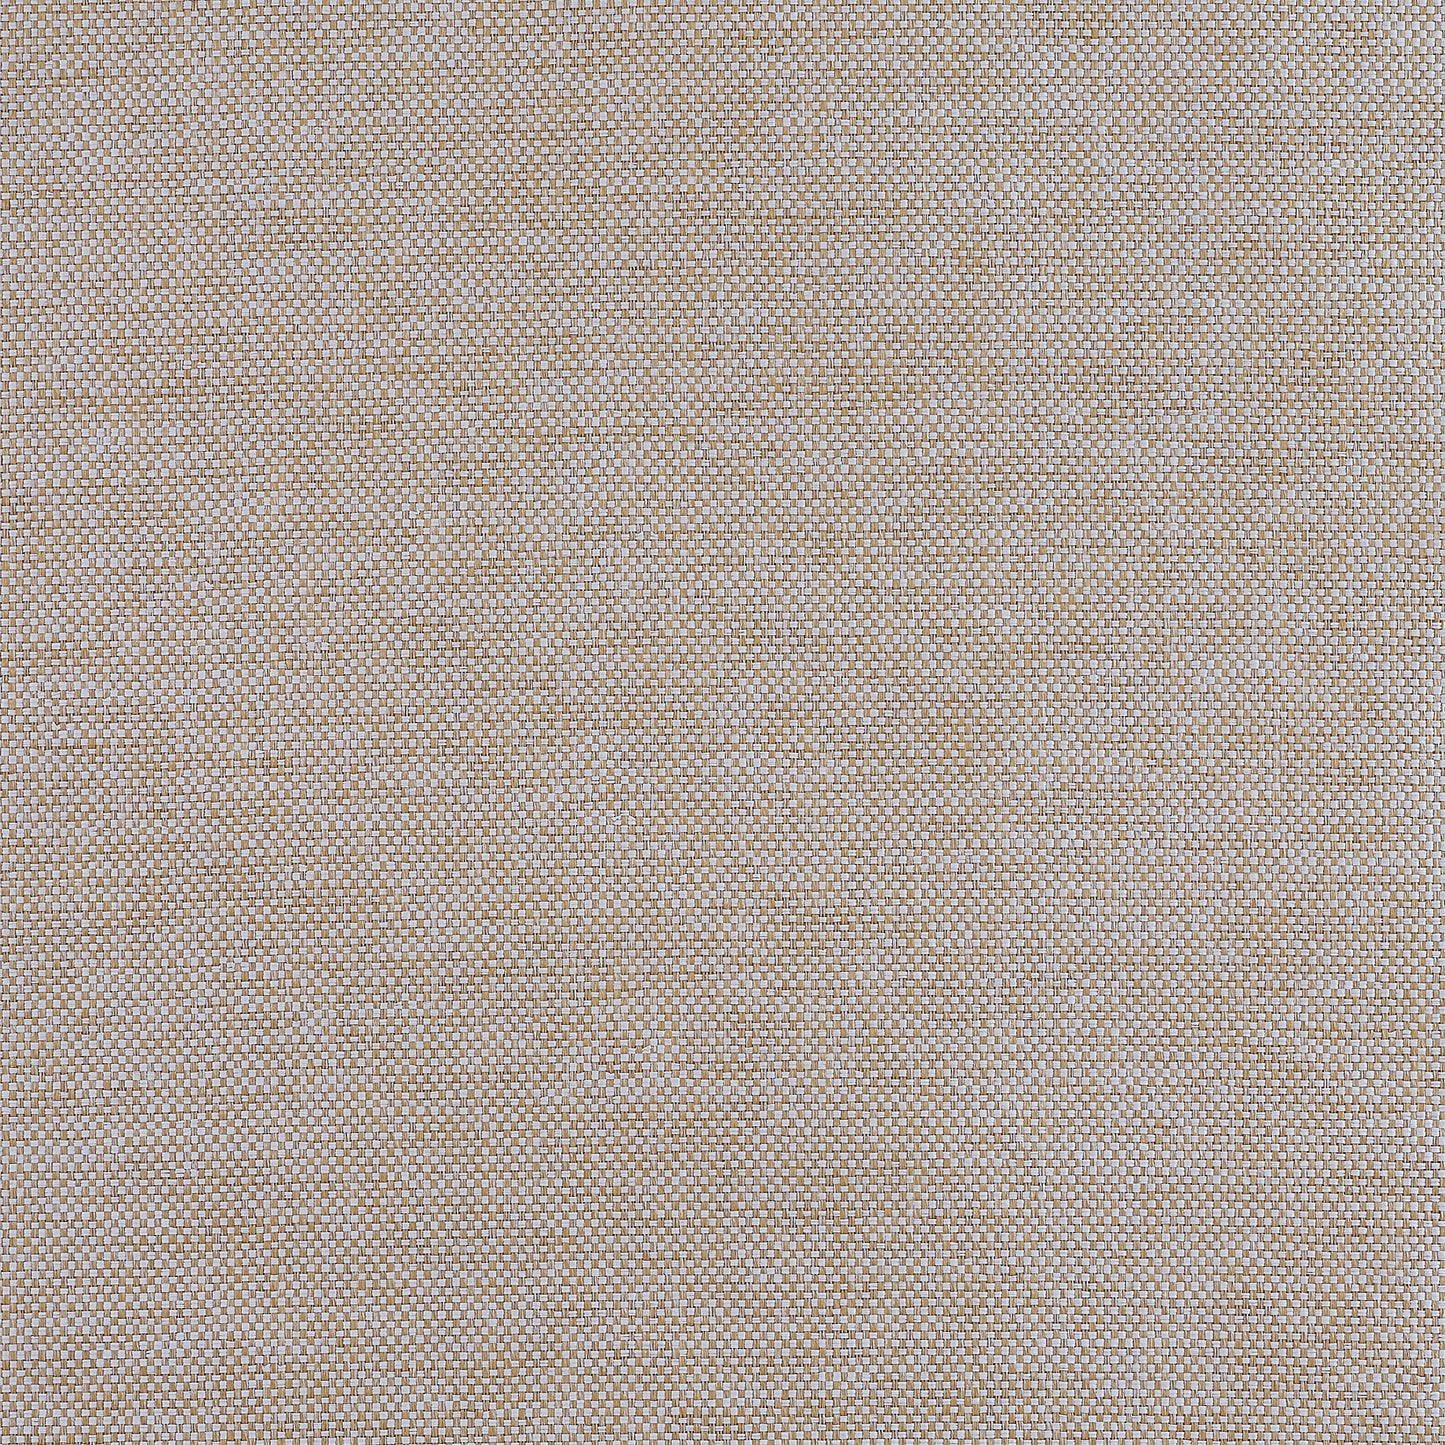 Purchase Thibaut Wallpaper Product# T19691 pattern name Clarkson Weave color Grey Blend. 